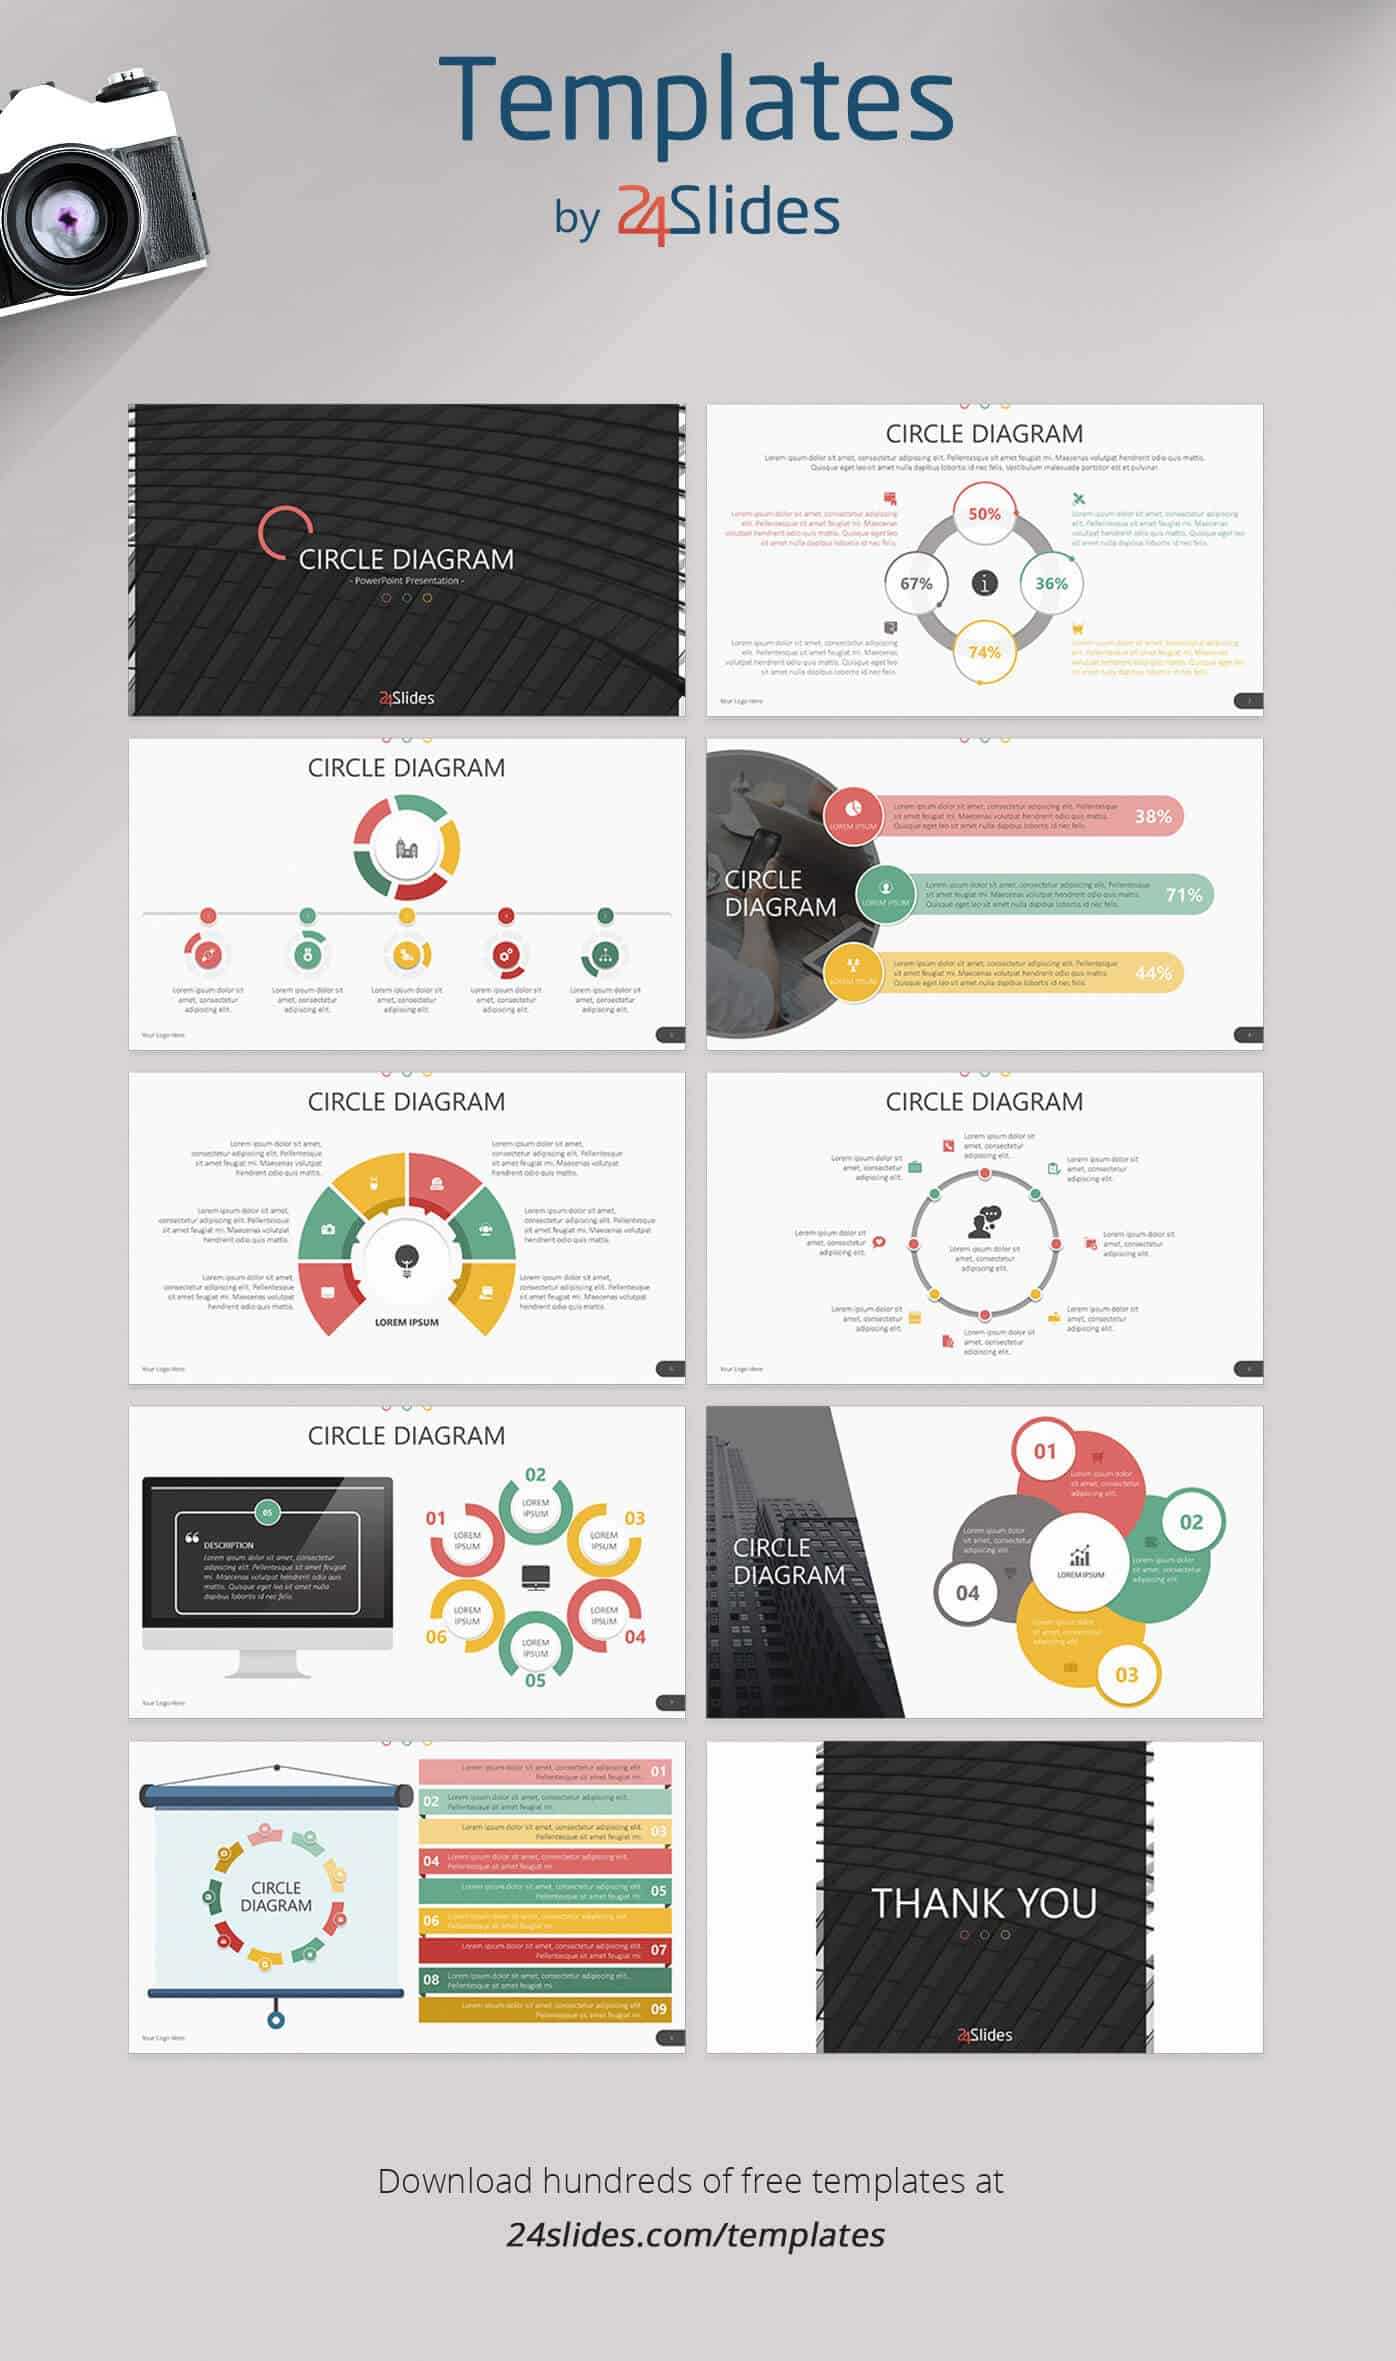 15 Fun And Colorful Free Powerpoint Templates | Present Better Intended For Sample Templates For Powerpoint Presentation